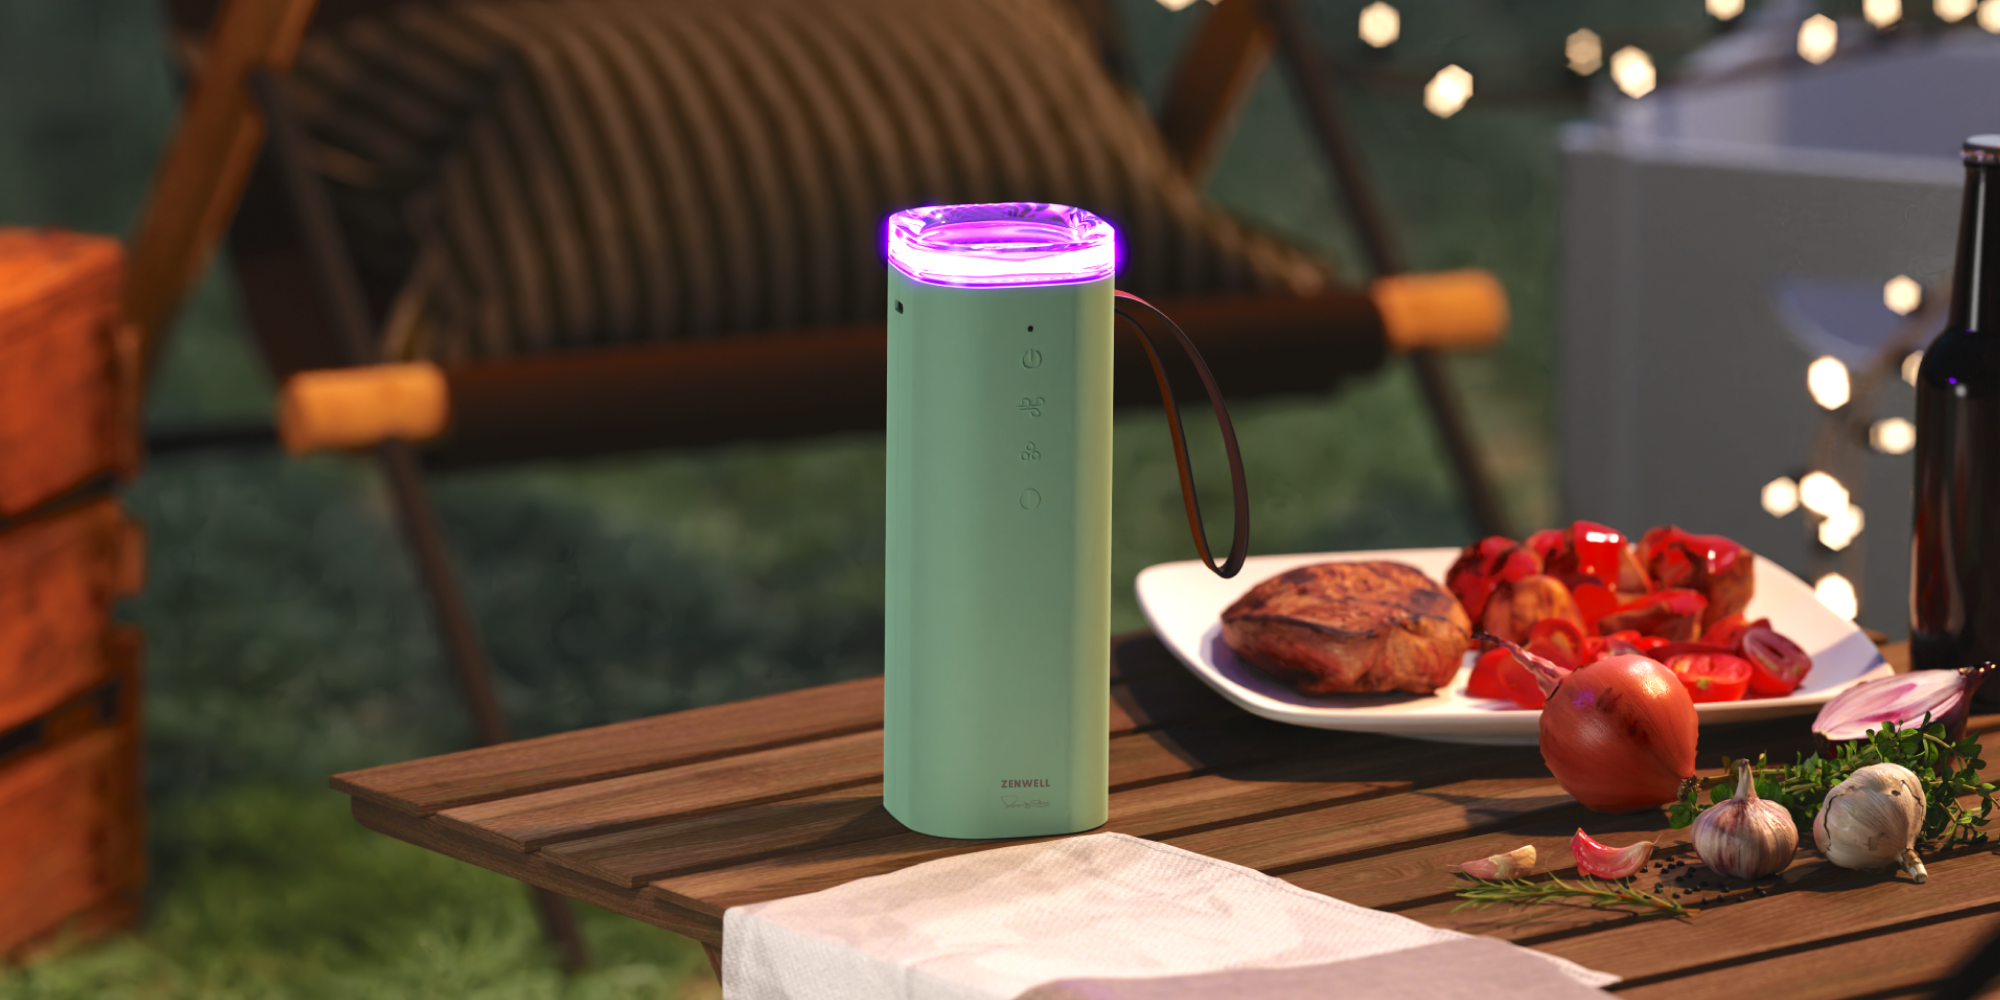 Zenwell Air Doctor Smart with mood light on placed on a outdoor picnic table